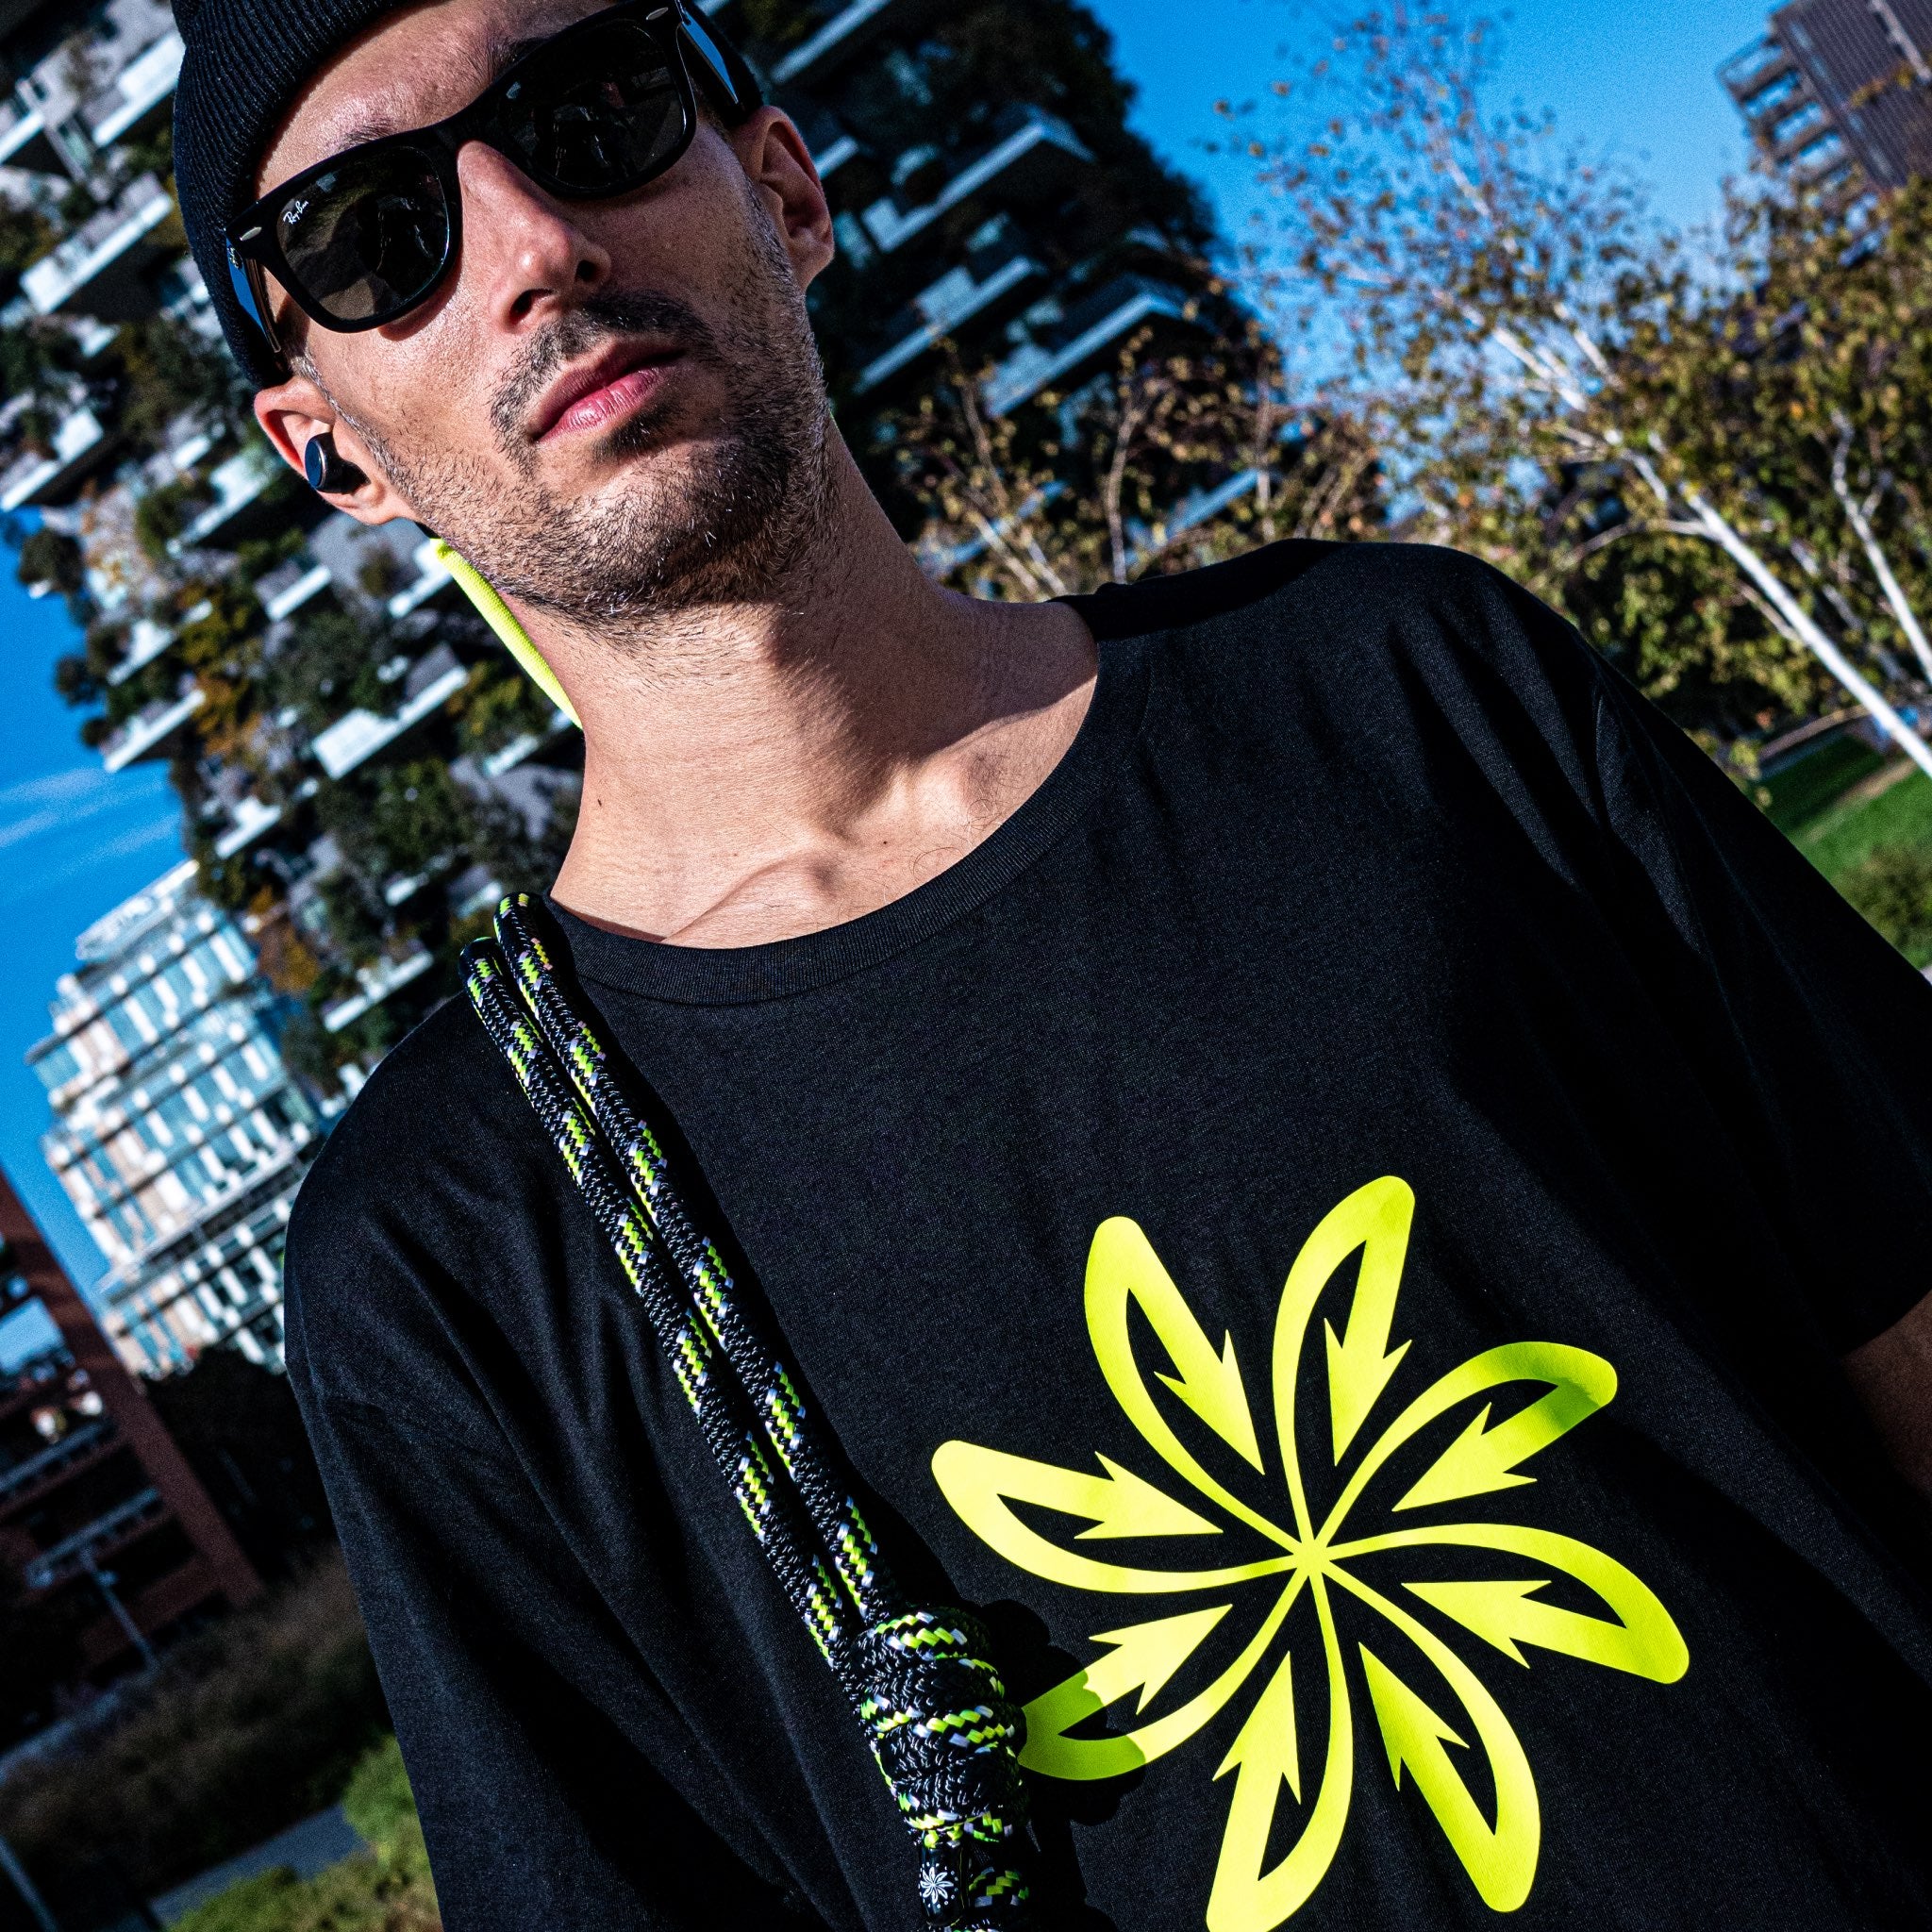 Phil standing wearing his black t-shirt with yellow fluo logo and with his Good Flow Milano Court SP rope over his shoulder, with Milan's Bosco Verticale in the background.